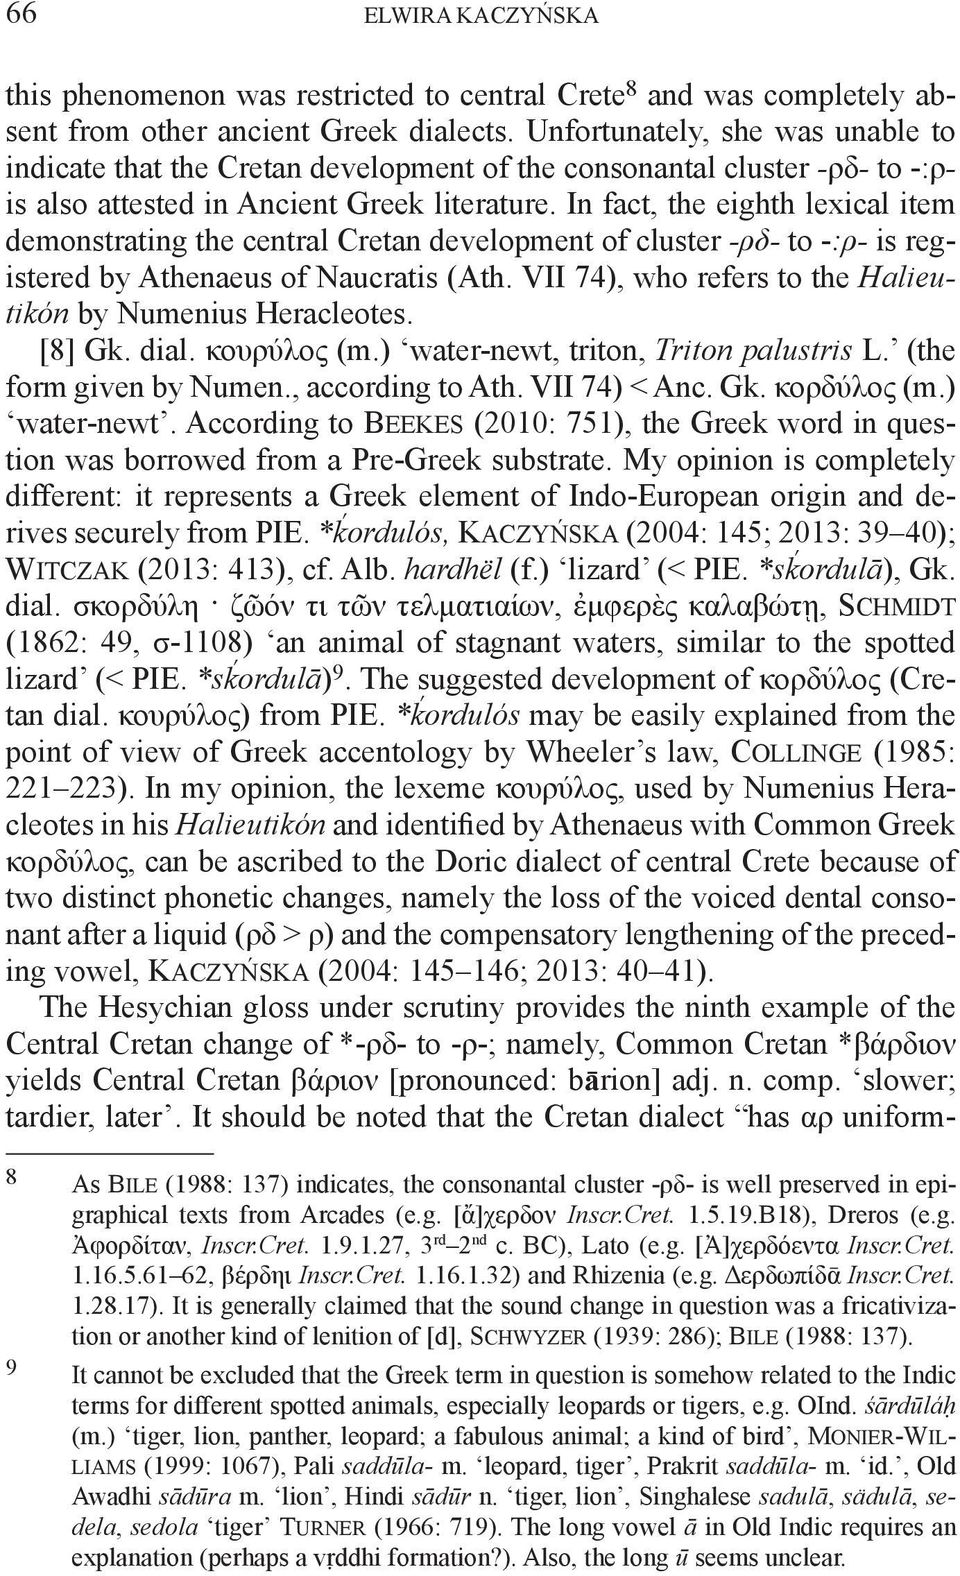 In fact, the eighth lexical item demonstrating the central Cretan development of cluster -ρδ- to -:ρ- is registered by Athenaeus of Naucratis (Ath.